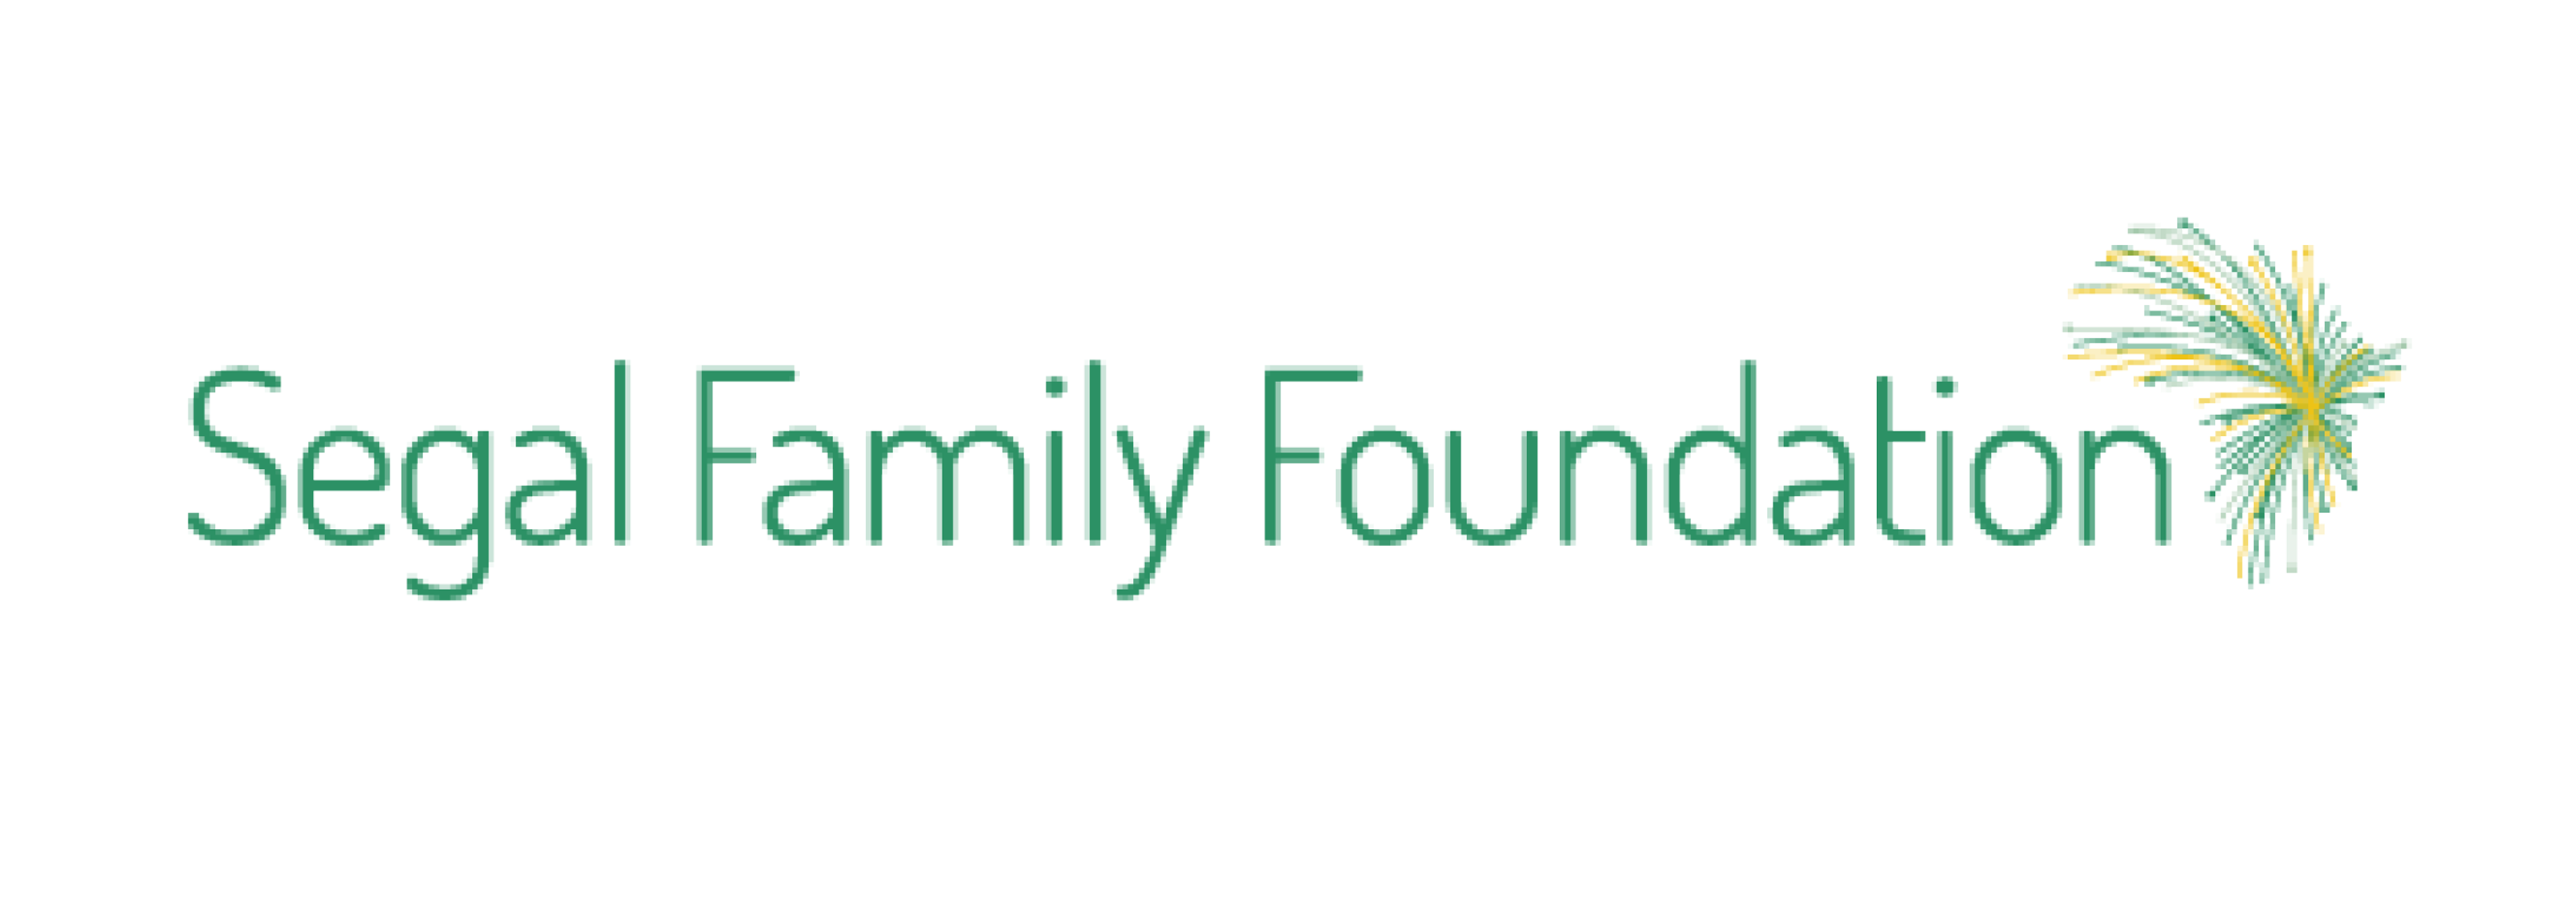 Segal Family Foundation Tugende